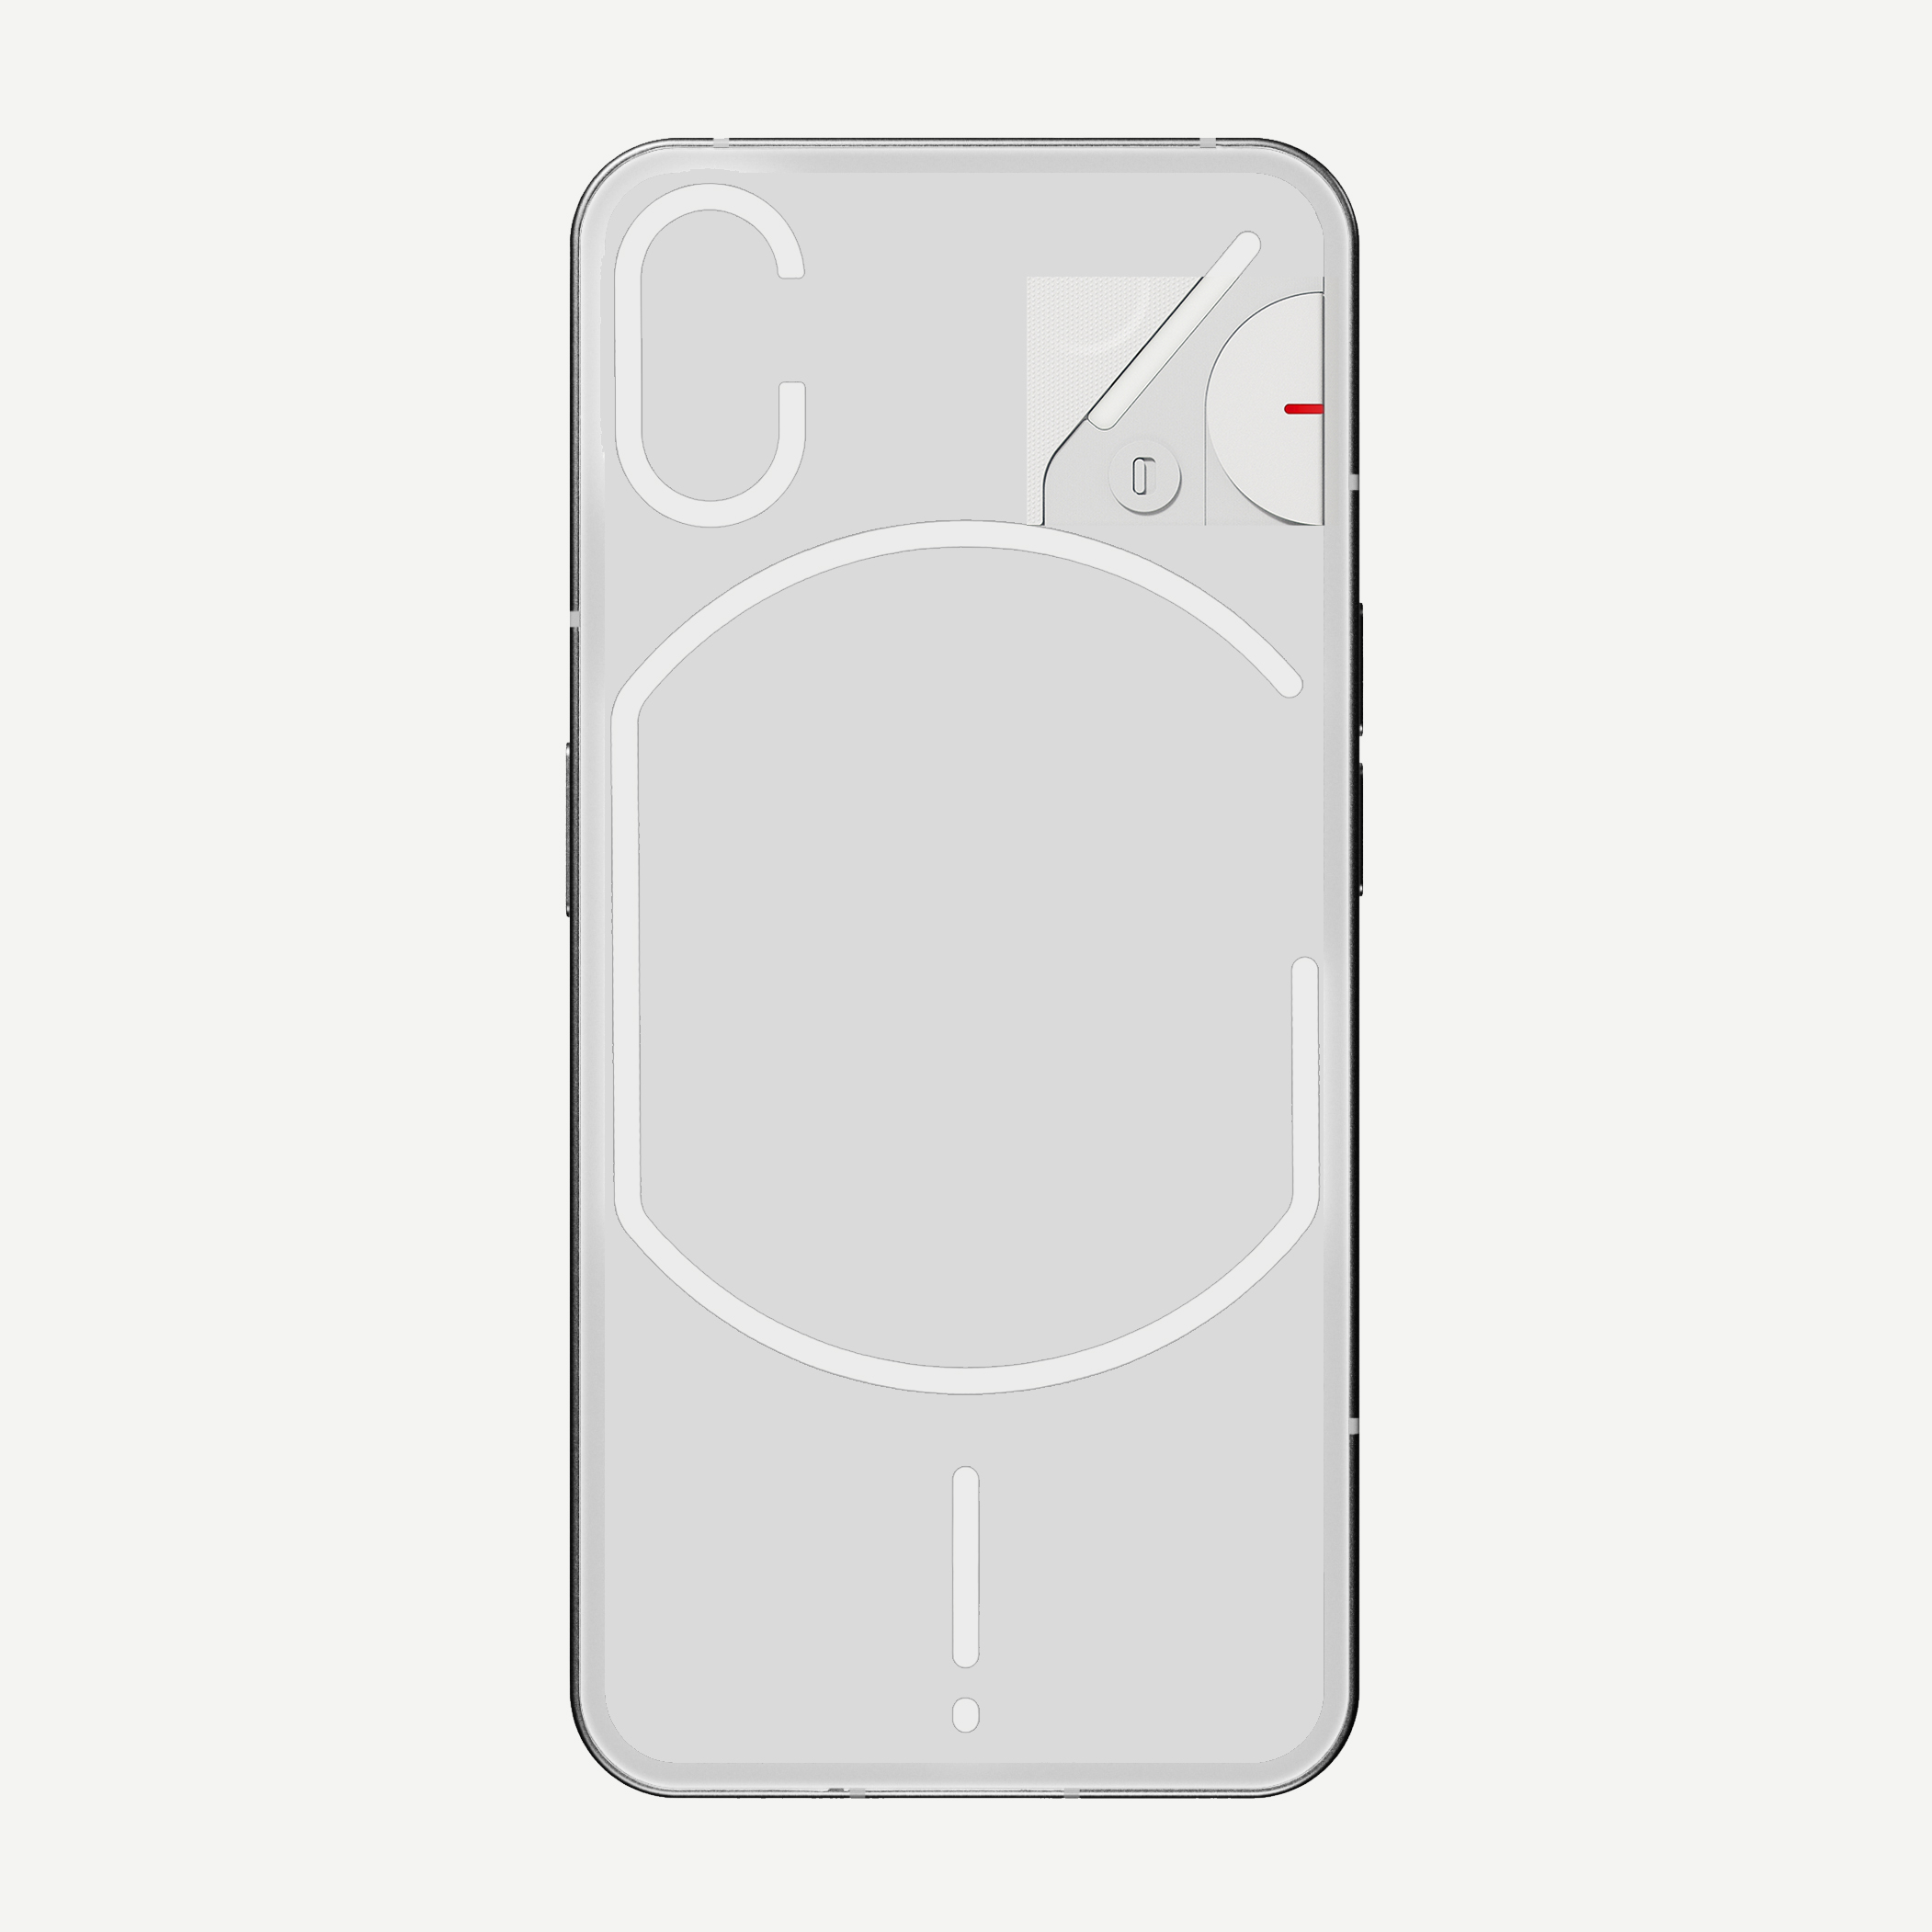 nothing phone (2) design renders and specifications revealed ahead of summer launch